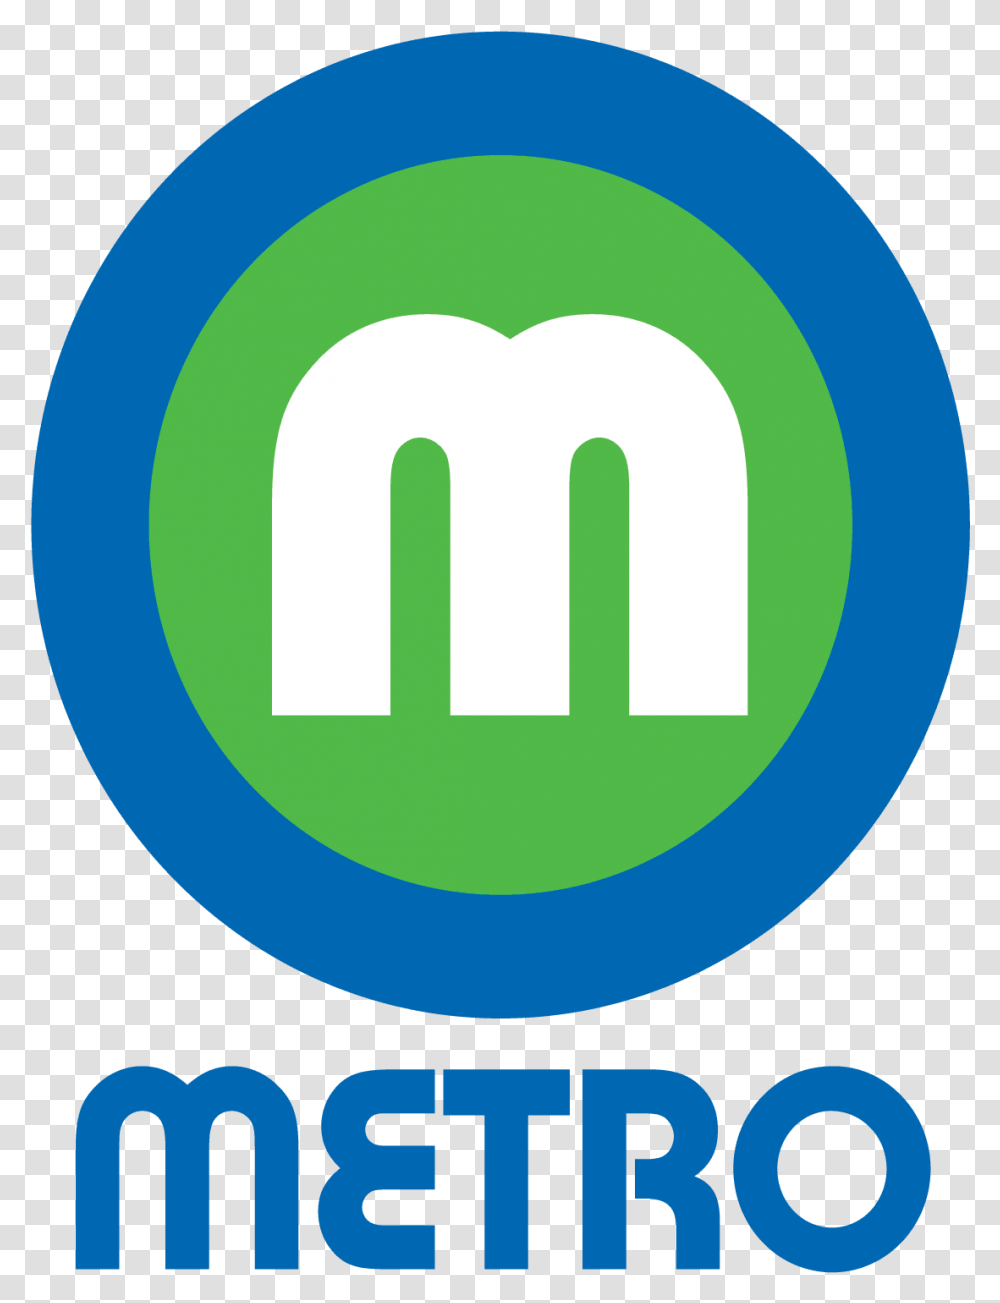 Download Thumbs Up Metro Logo Metro Moline Full Size Thousand Foot Krutch Welcome, Symbol, Trademark, Poster, Advertisement Transparent Png